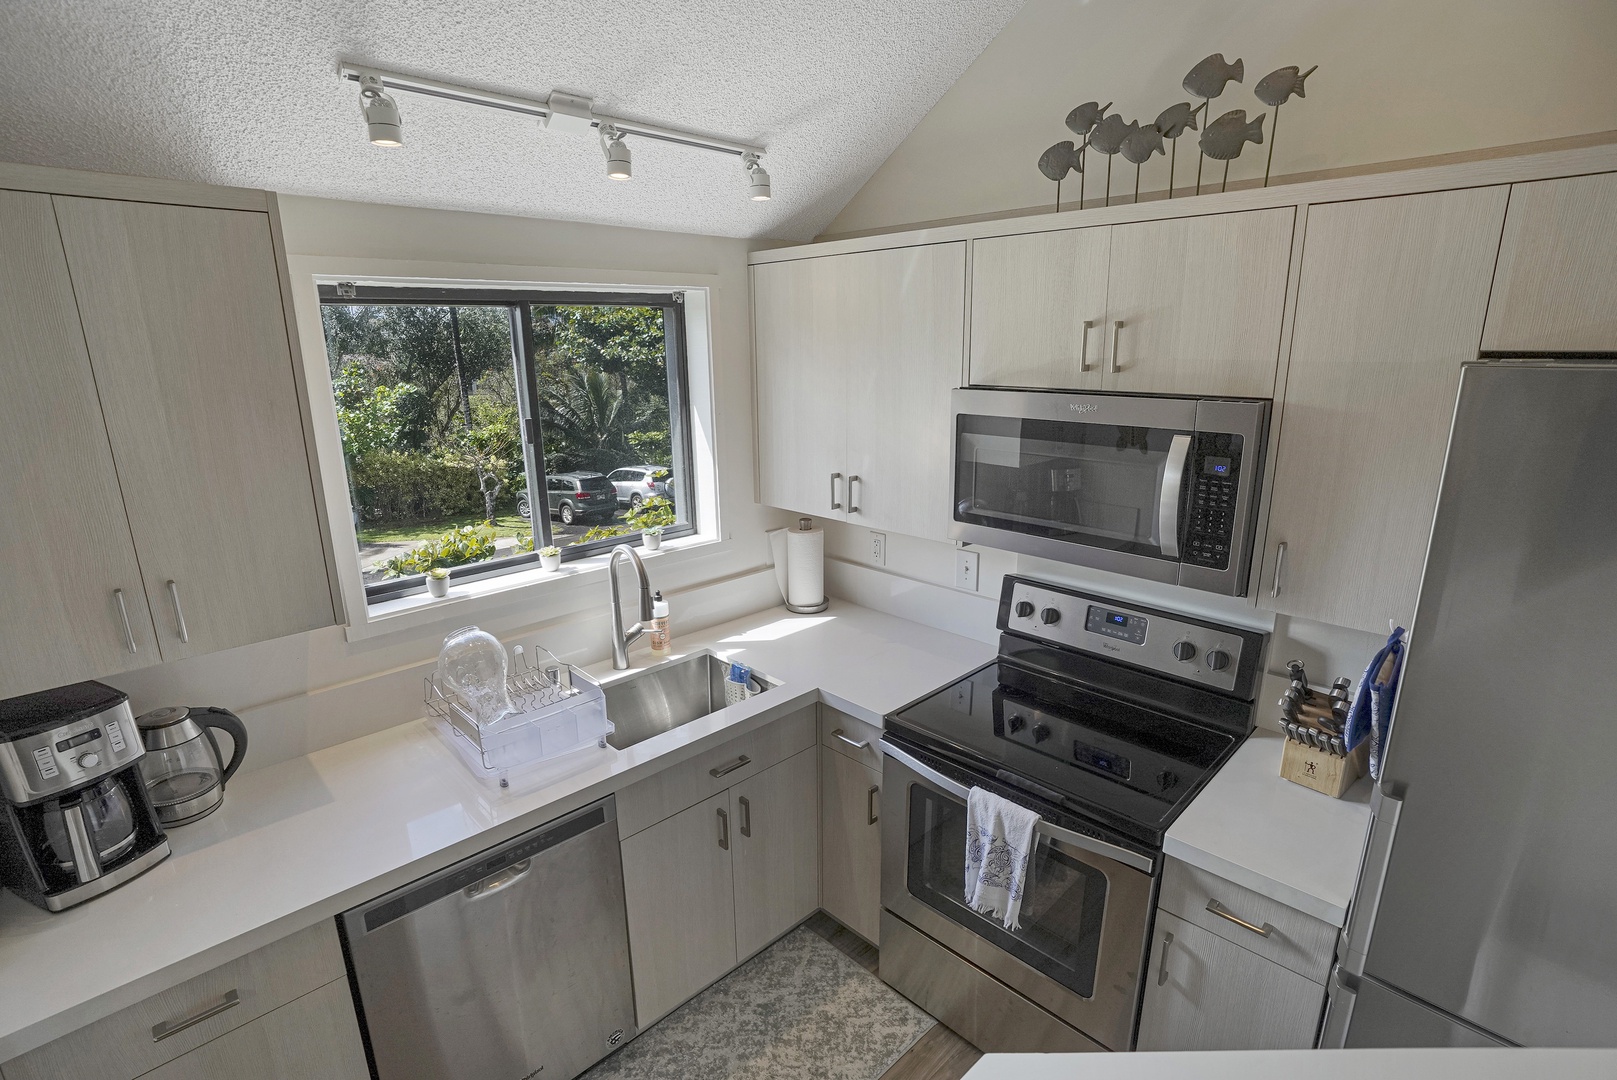 Princeville Vacation Rentals, Sealodge Villa H5 - Well-equipped for meal preparation